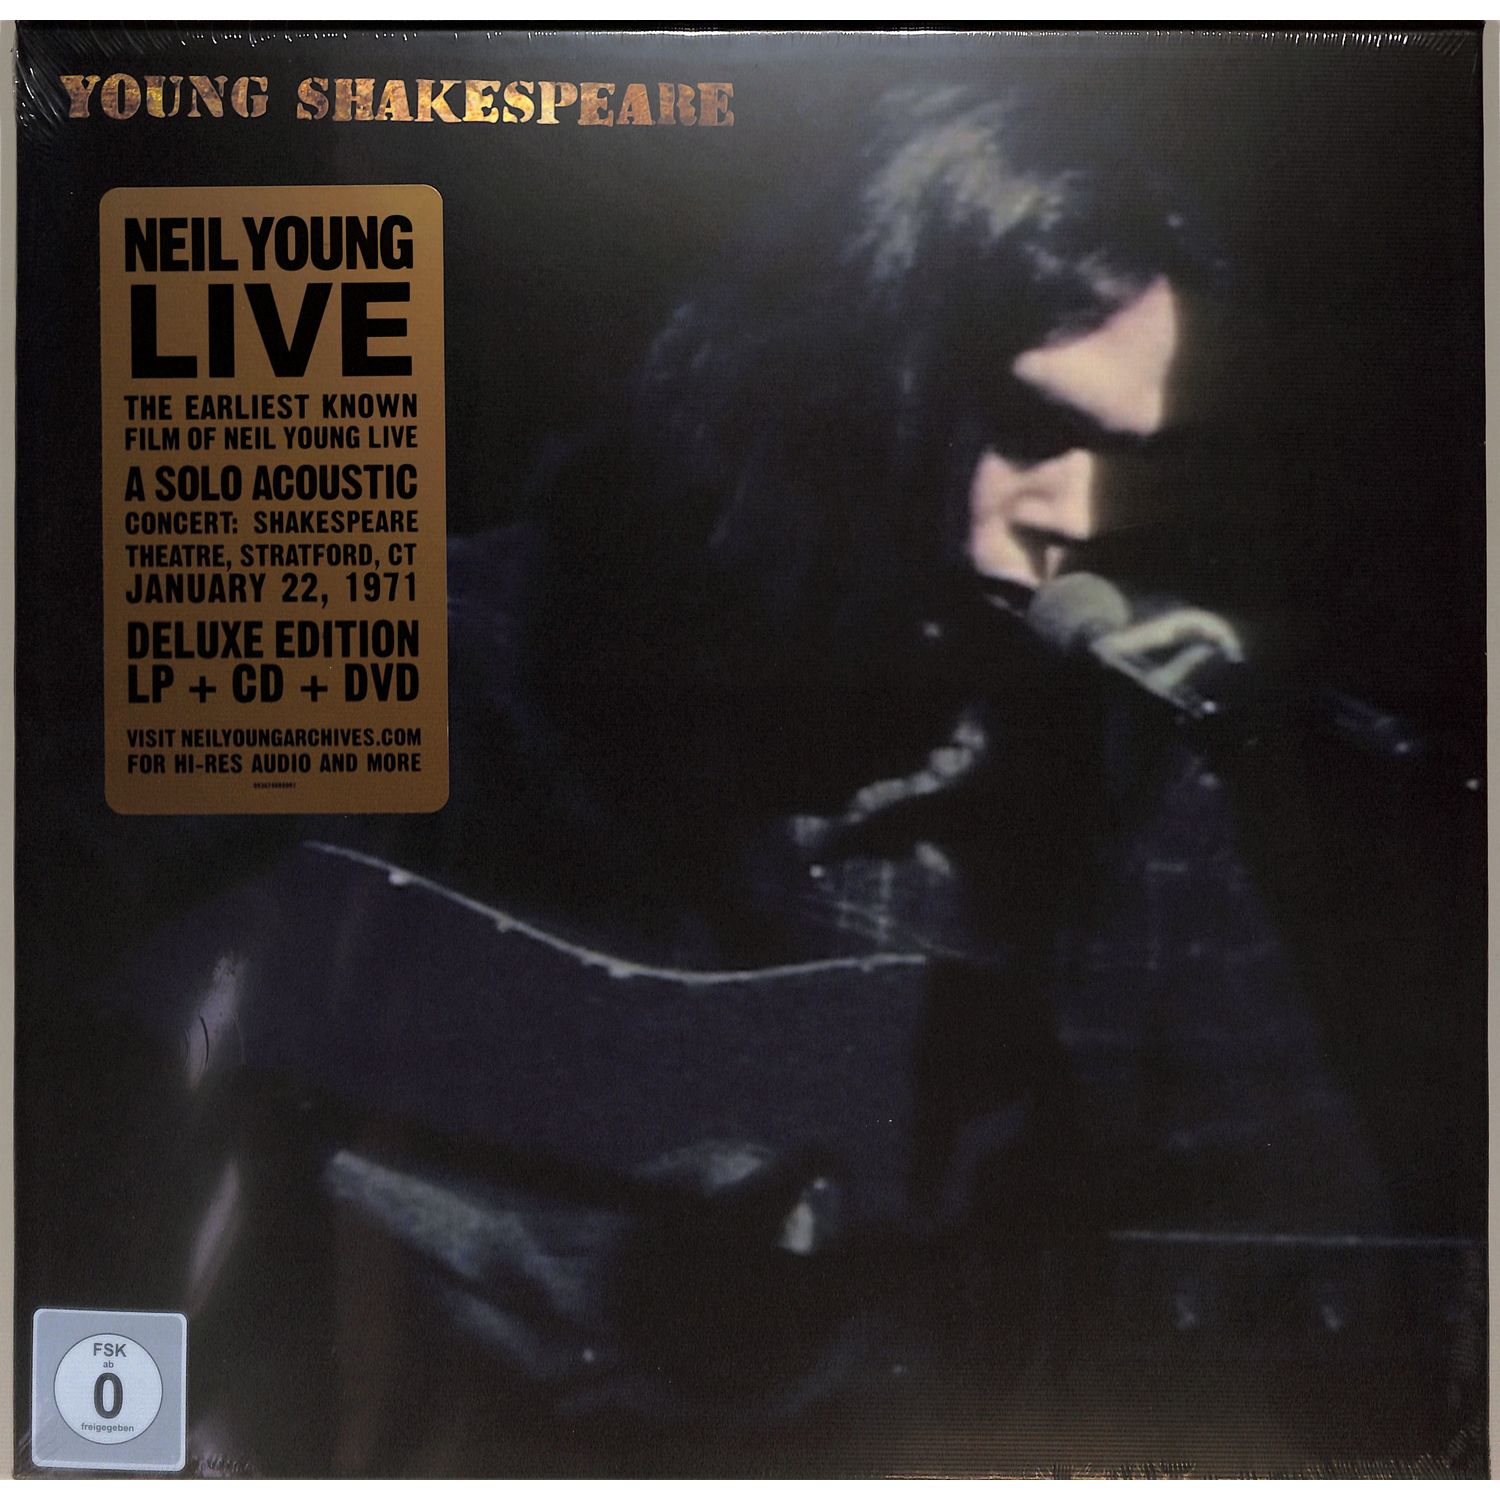 Neil Young - YOUNG SHAKESPEARE 